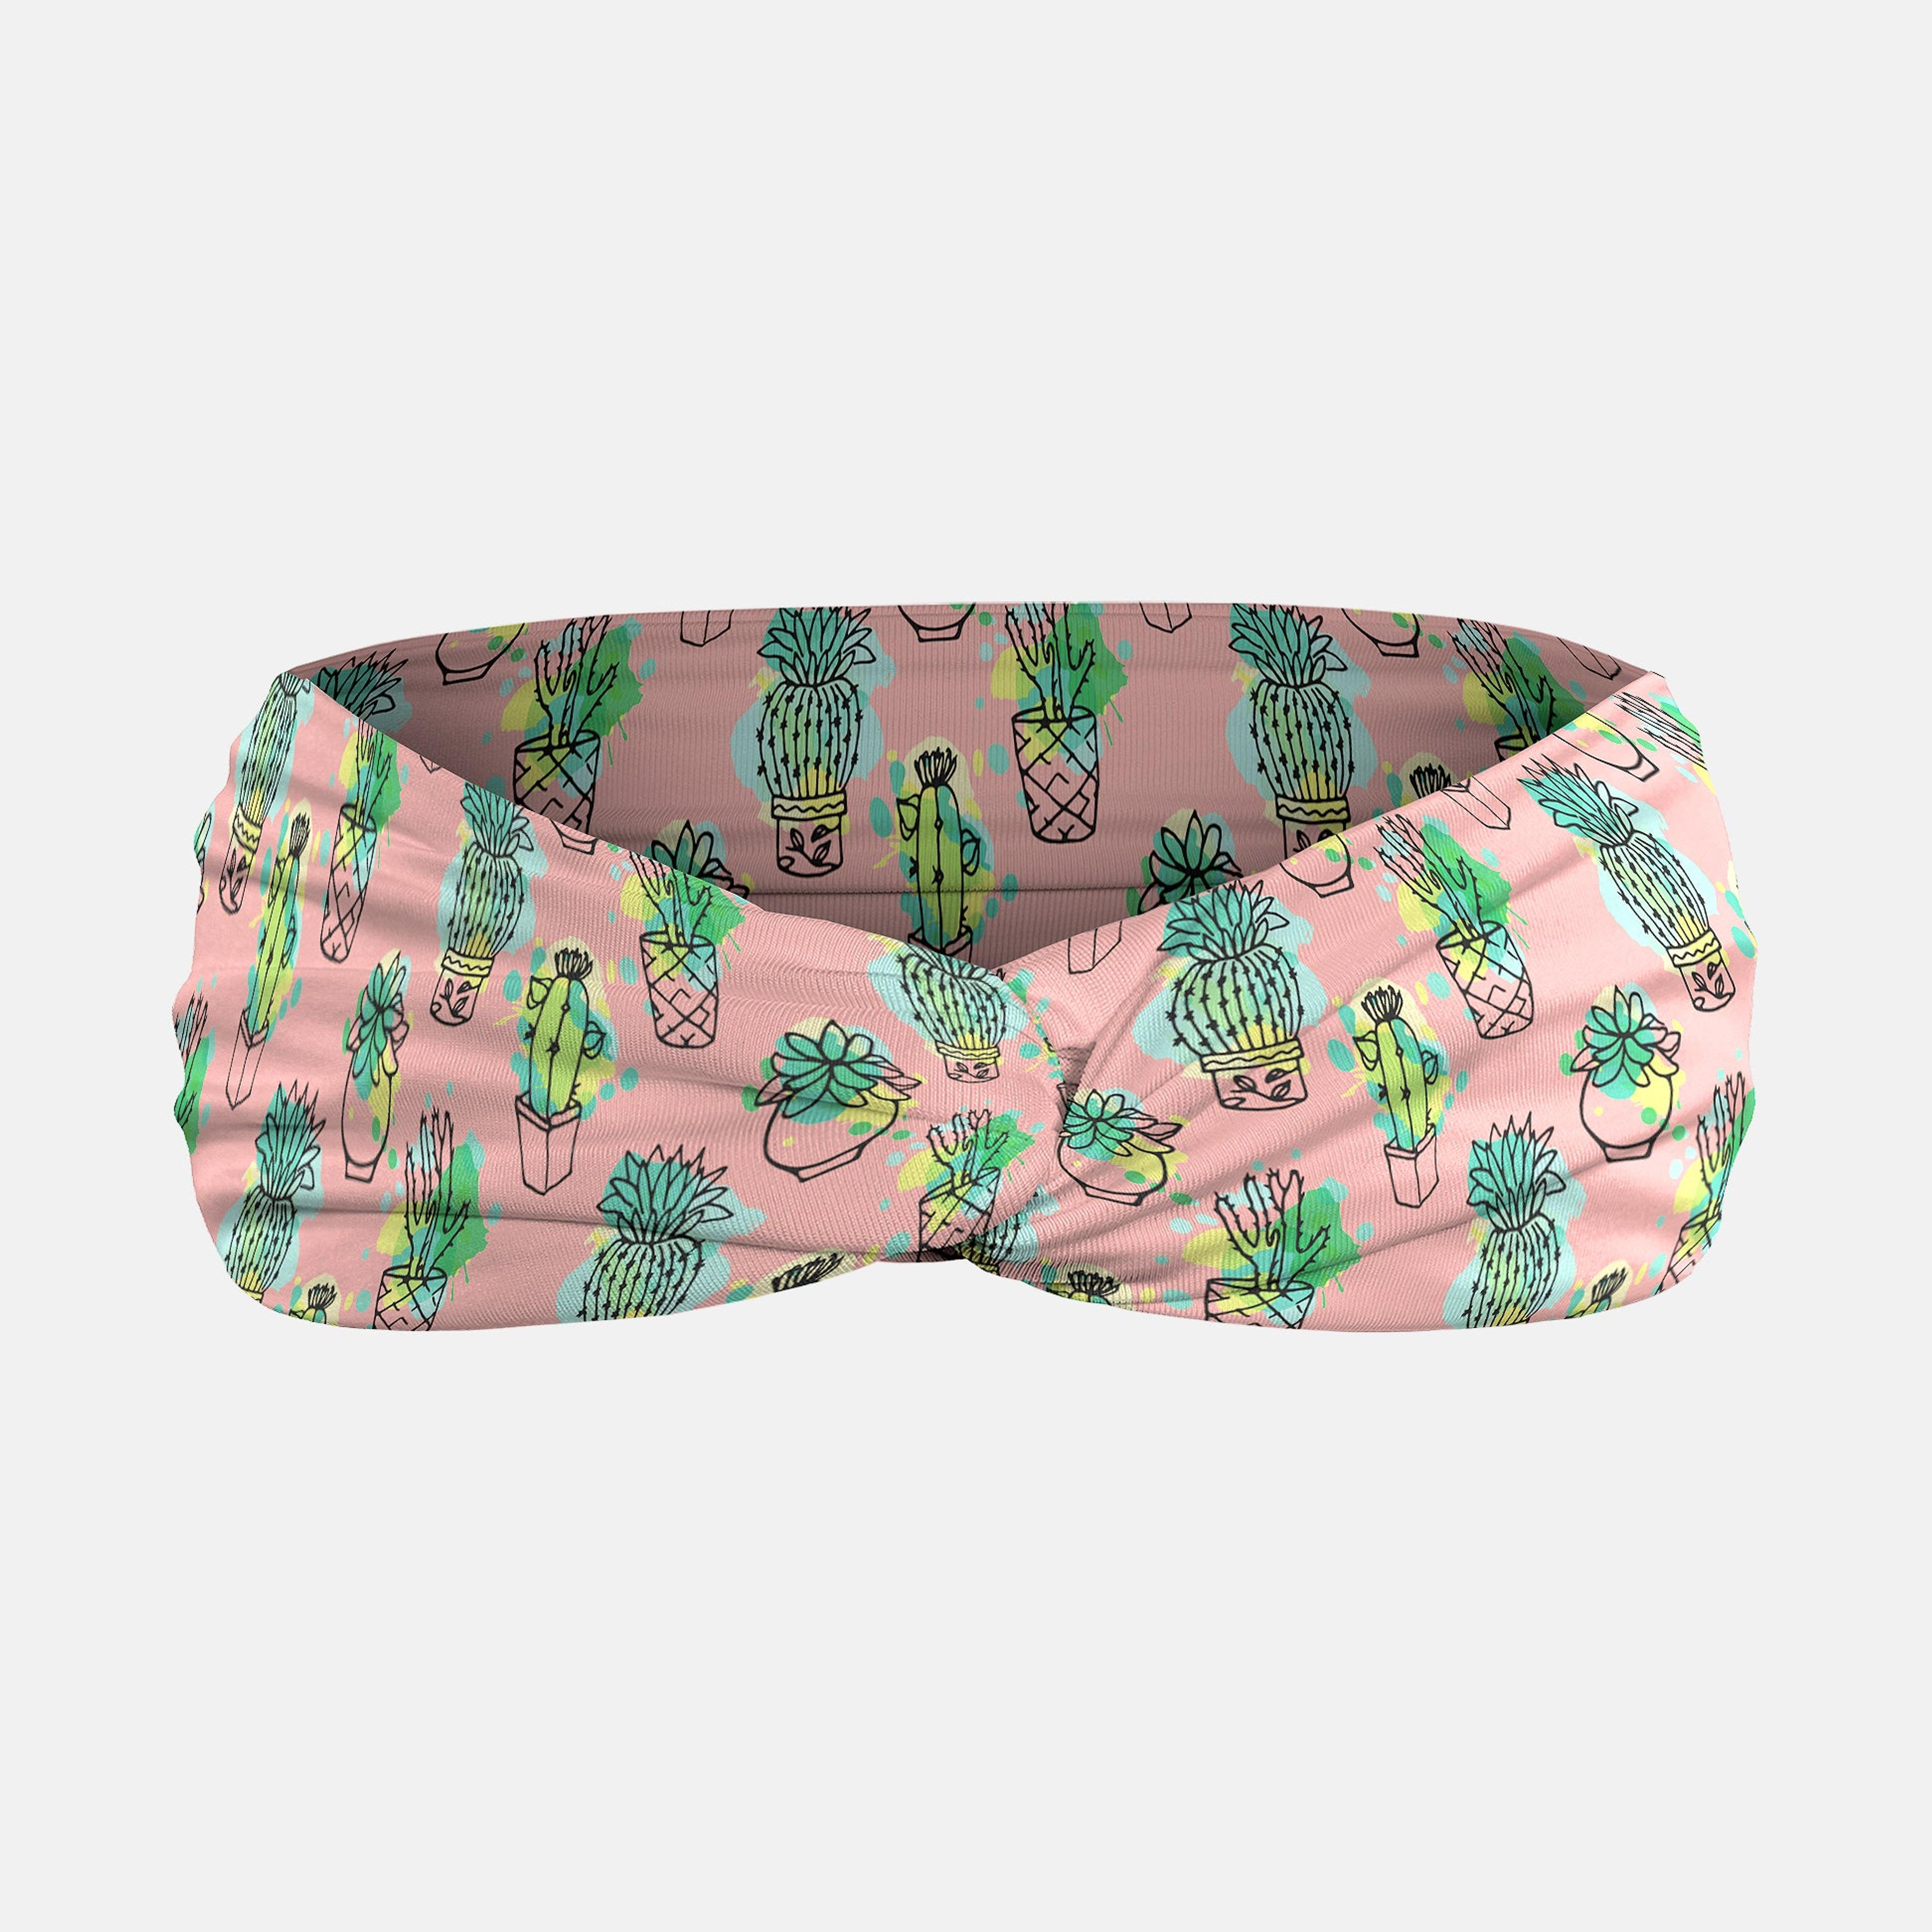 Cactus on Pink Turban Twisted Headband - ONE SIZE / Pink/Green/Yellow